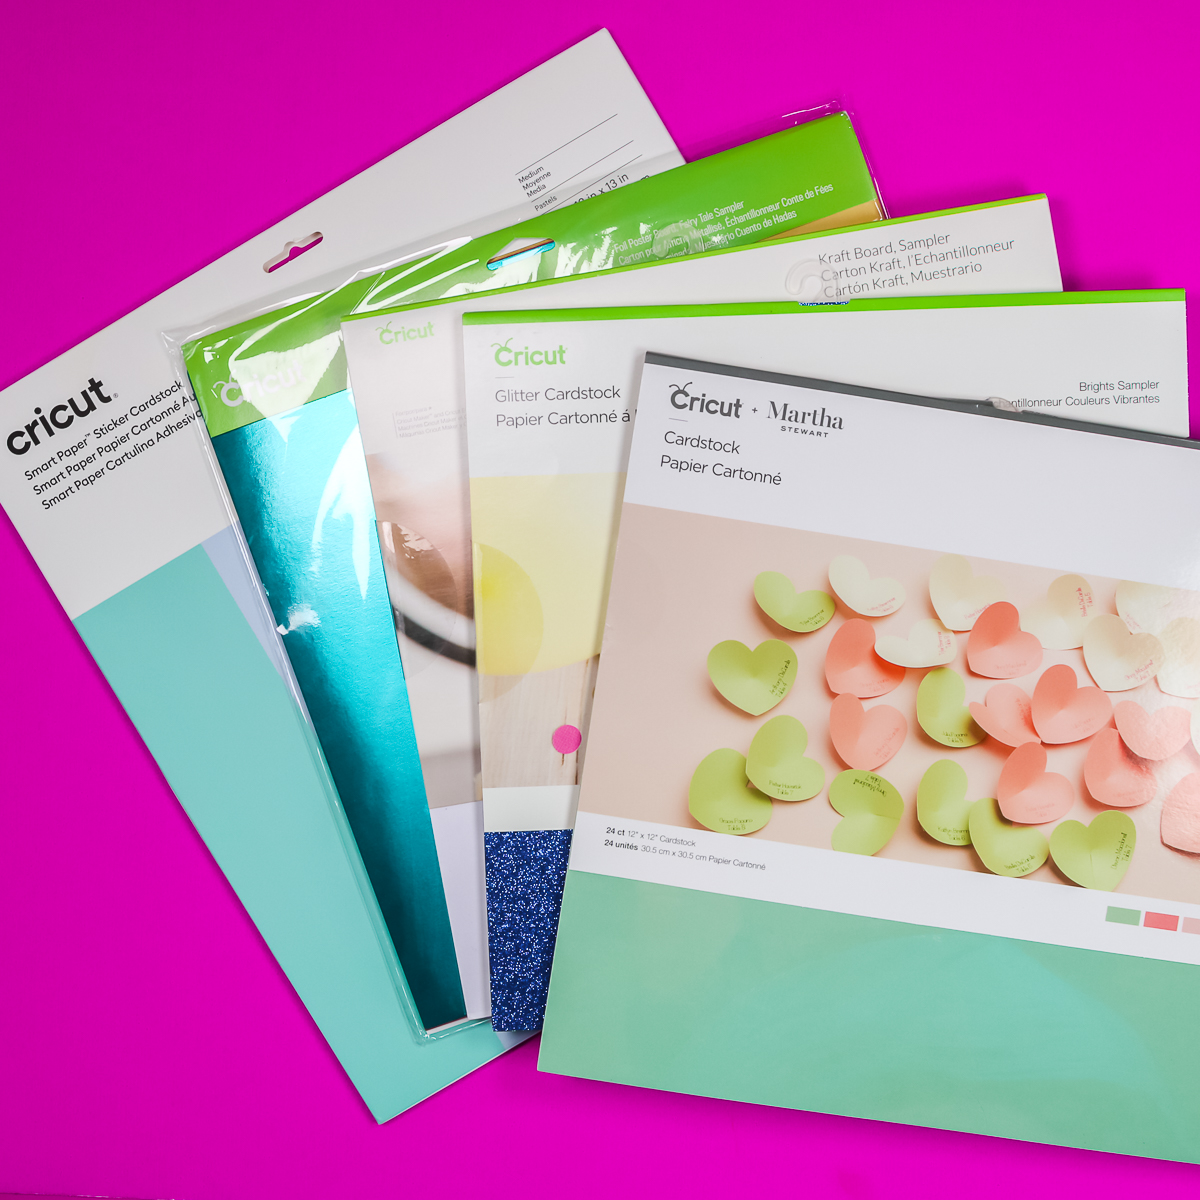 Find the Best Cardstock for Cricut: Top 5 Picks 